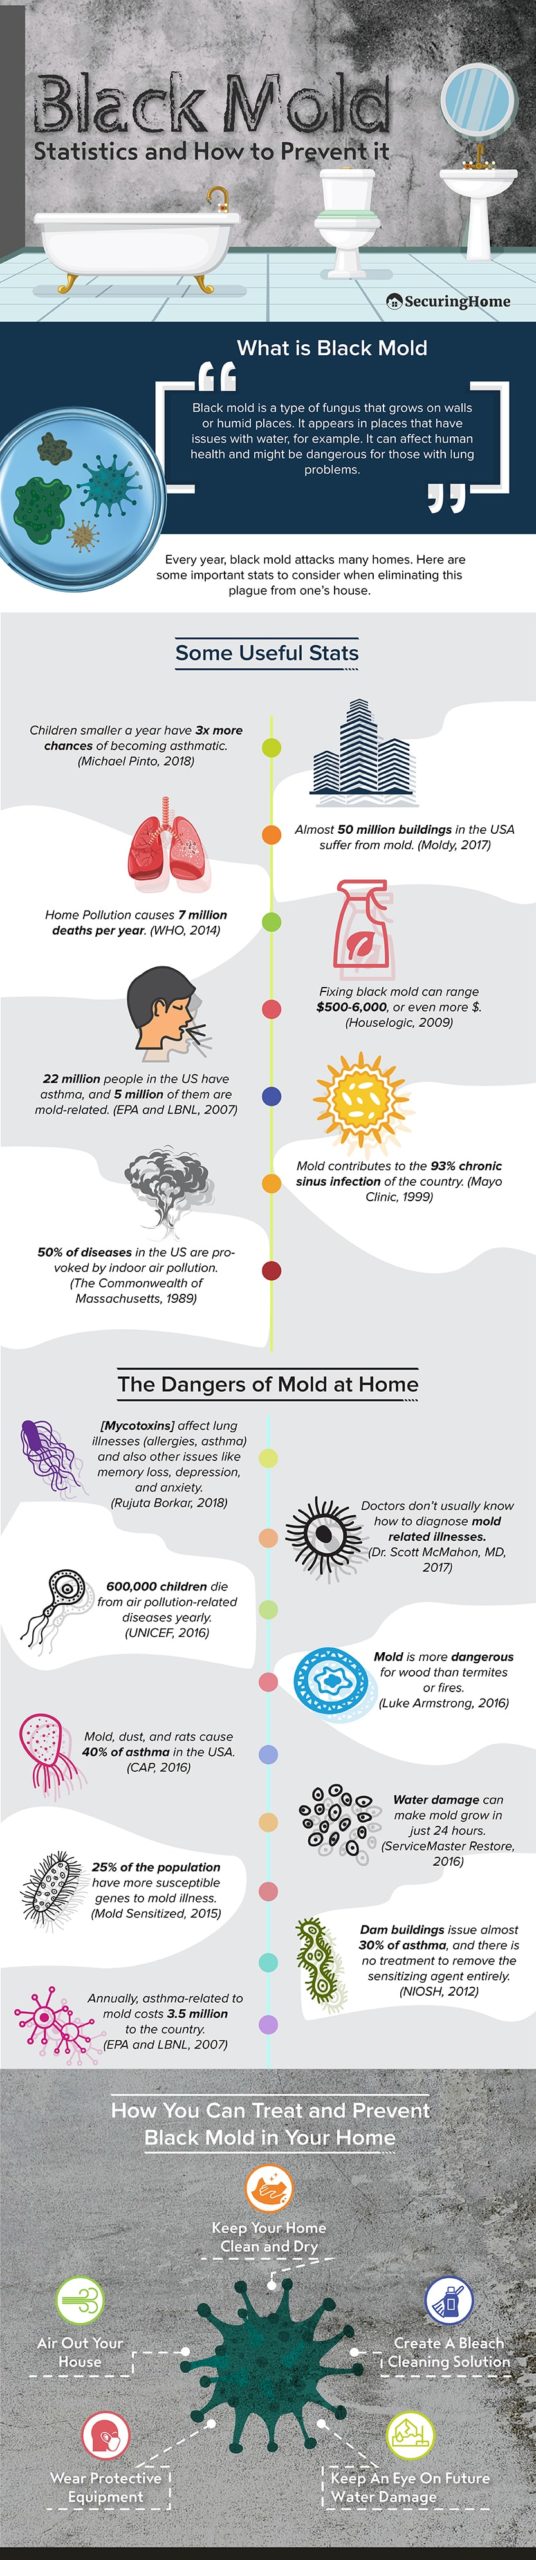 Infographic : How to get rid of black mold?
